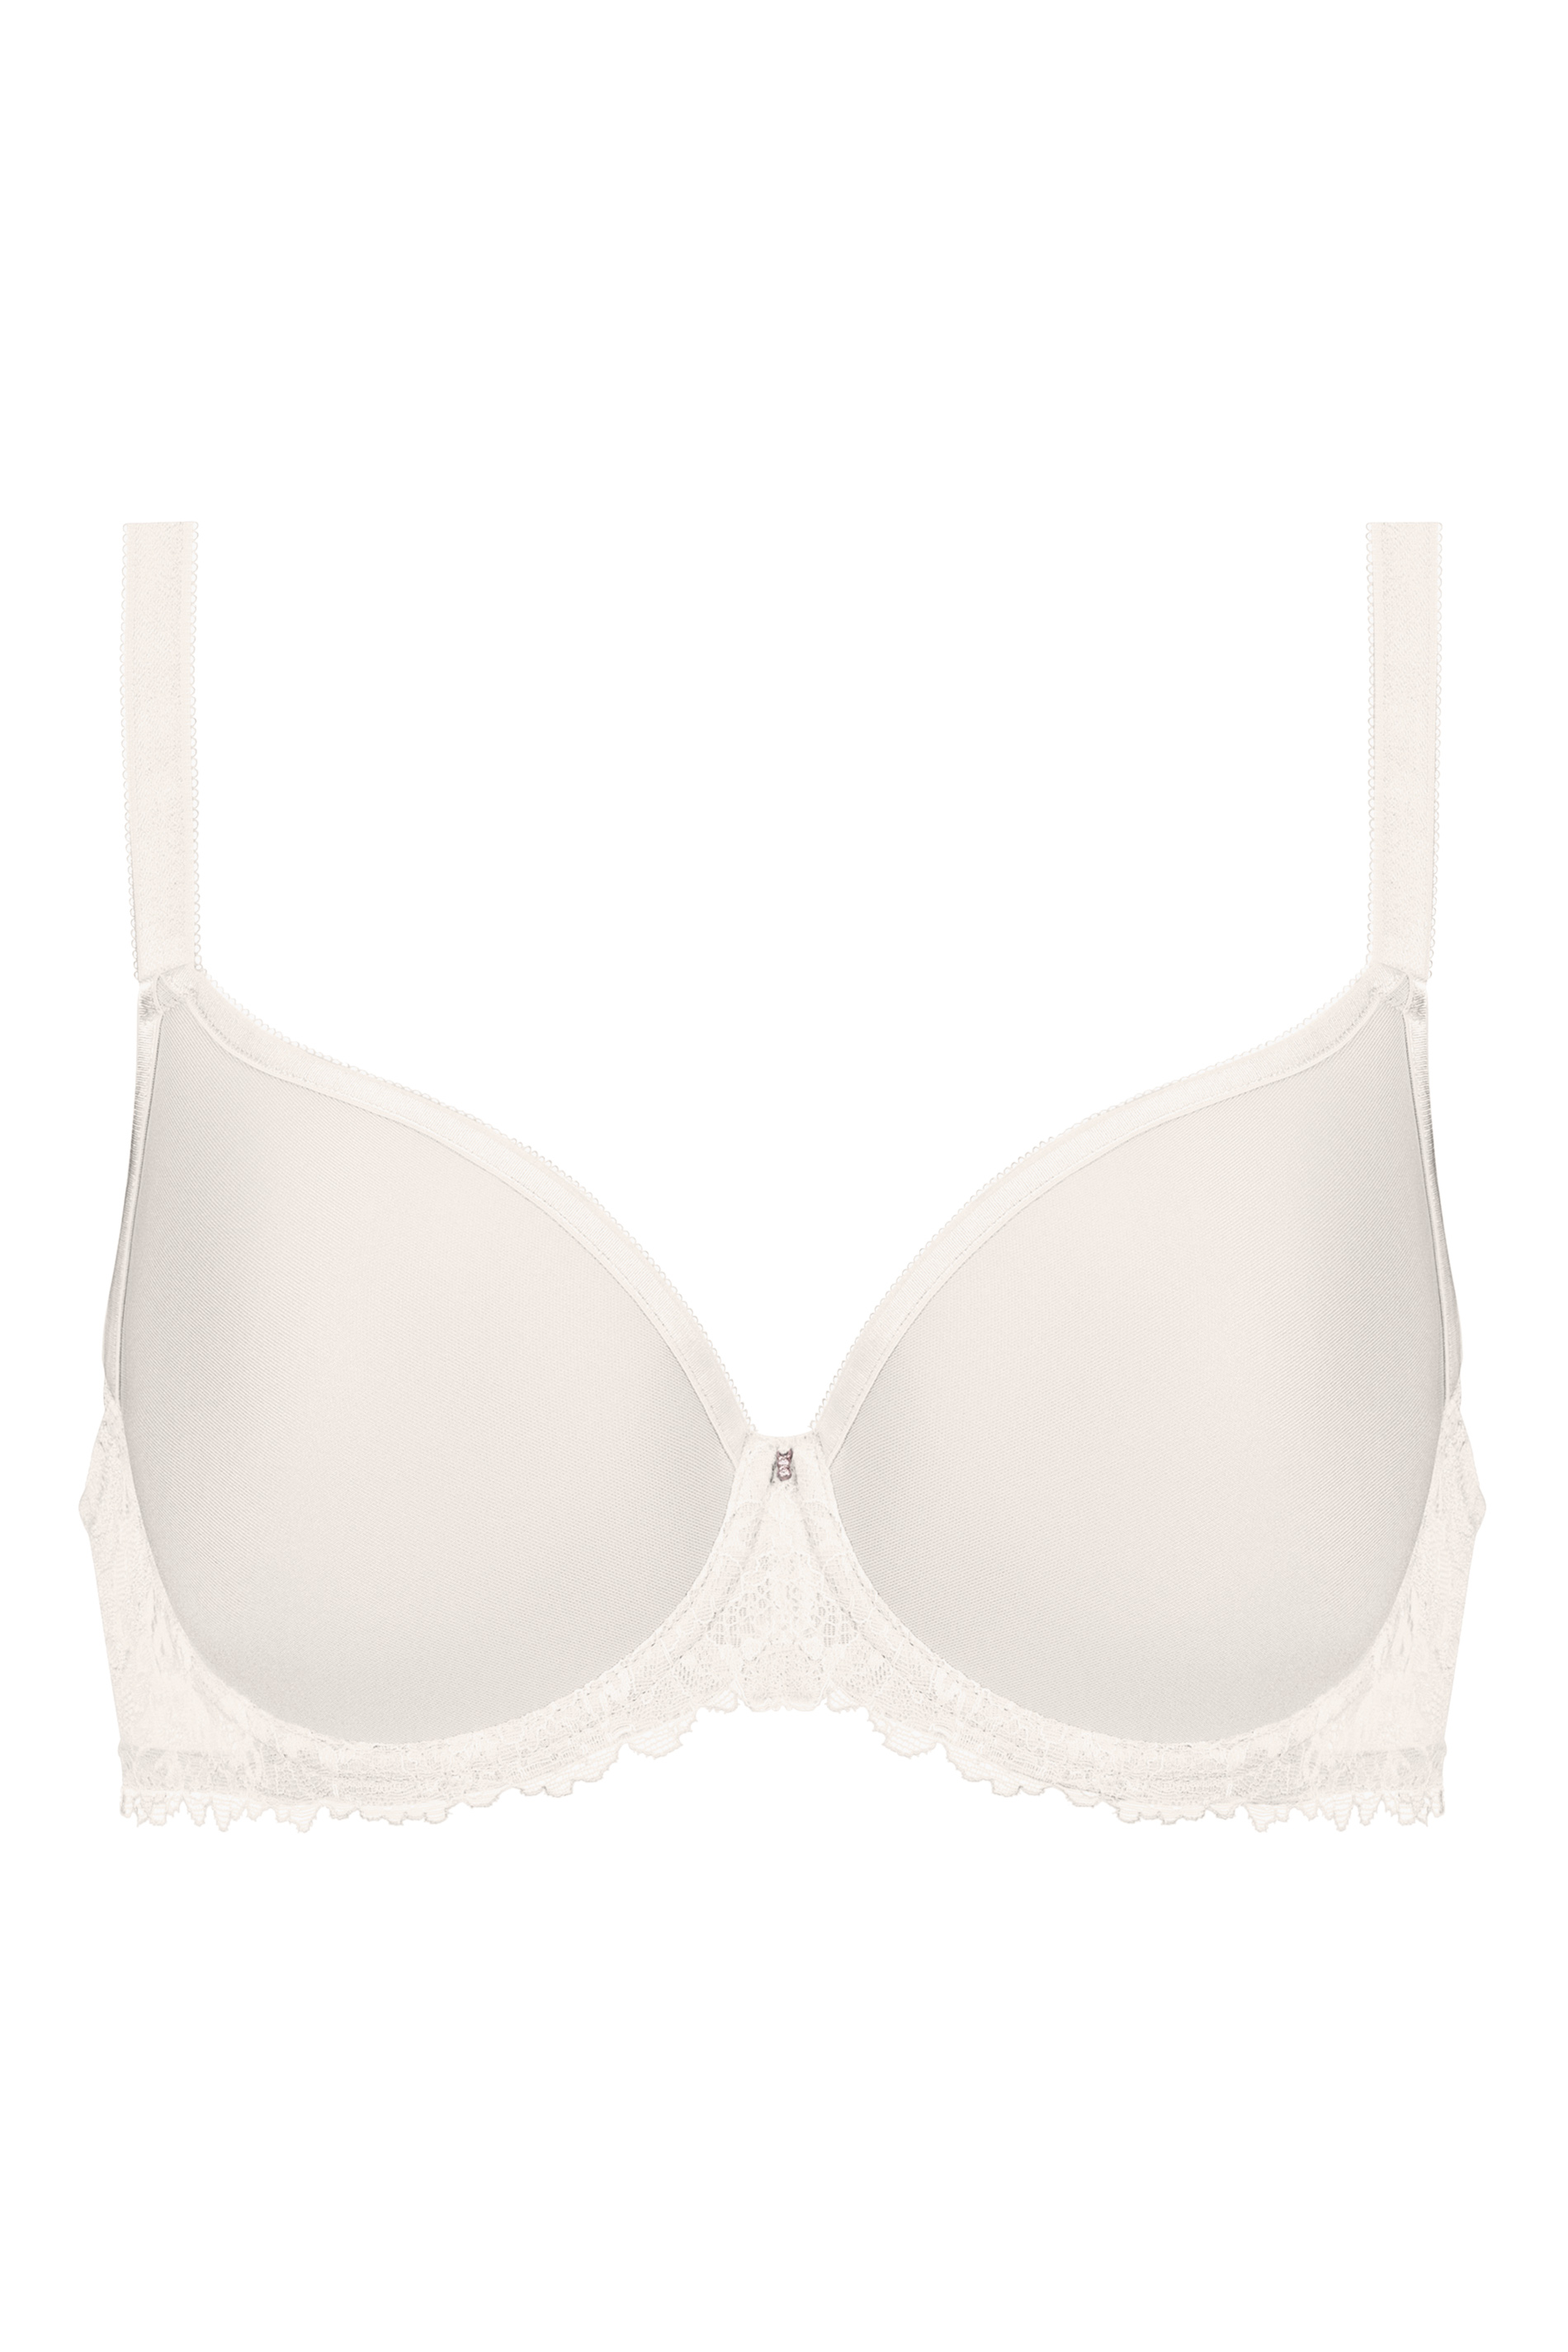 Spacer bra | Full Cup Champagner Serie Luxurious Cut Out | mey®